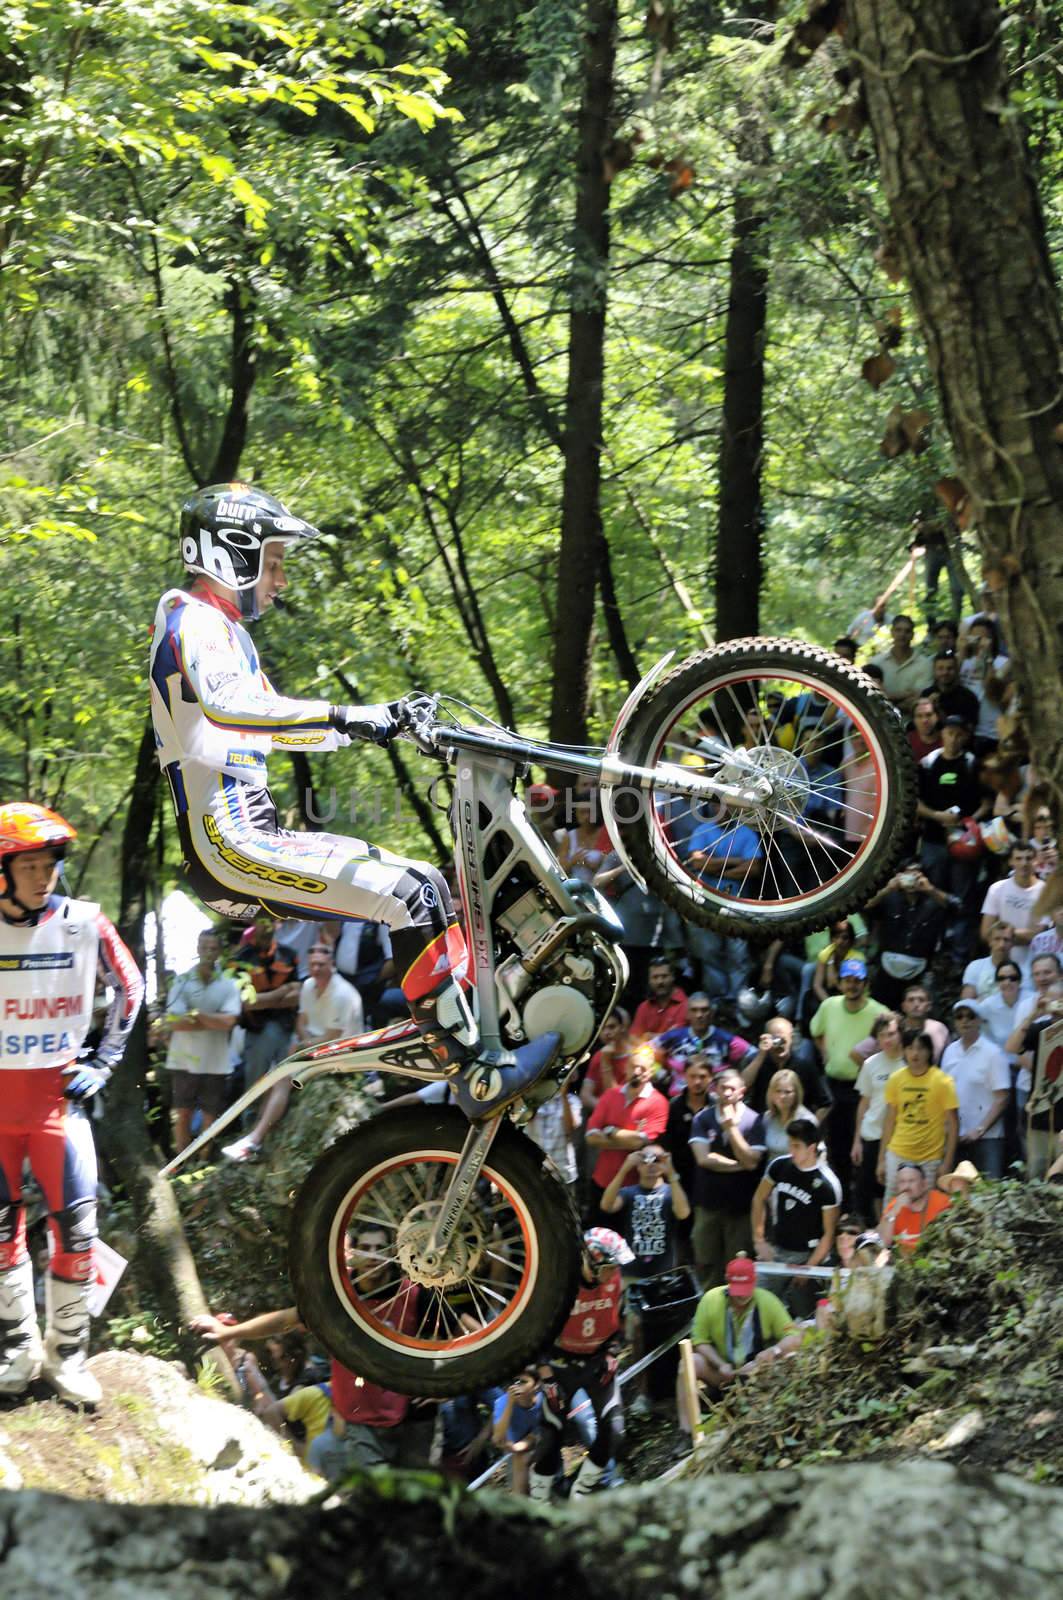 Rider jumping during the race